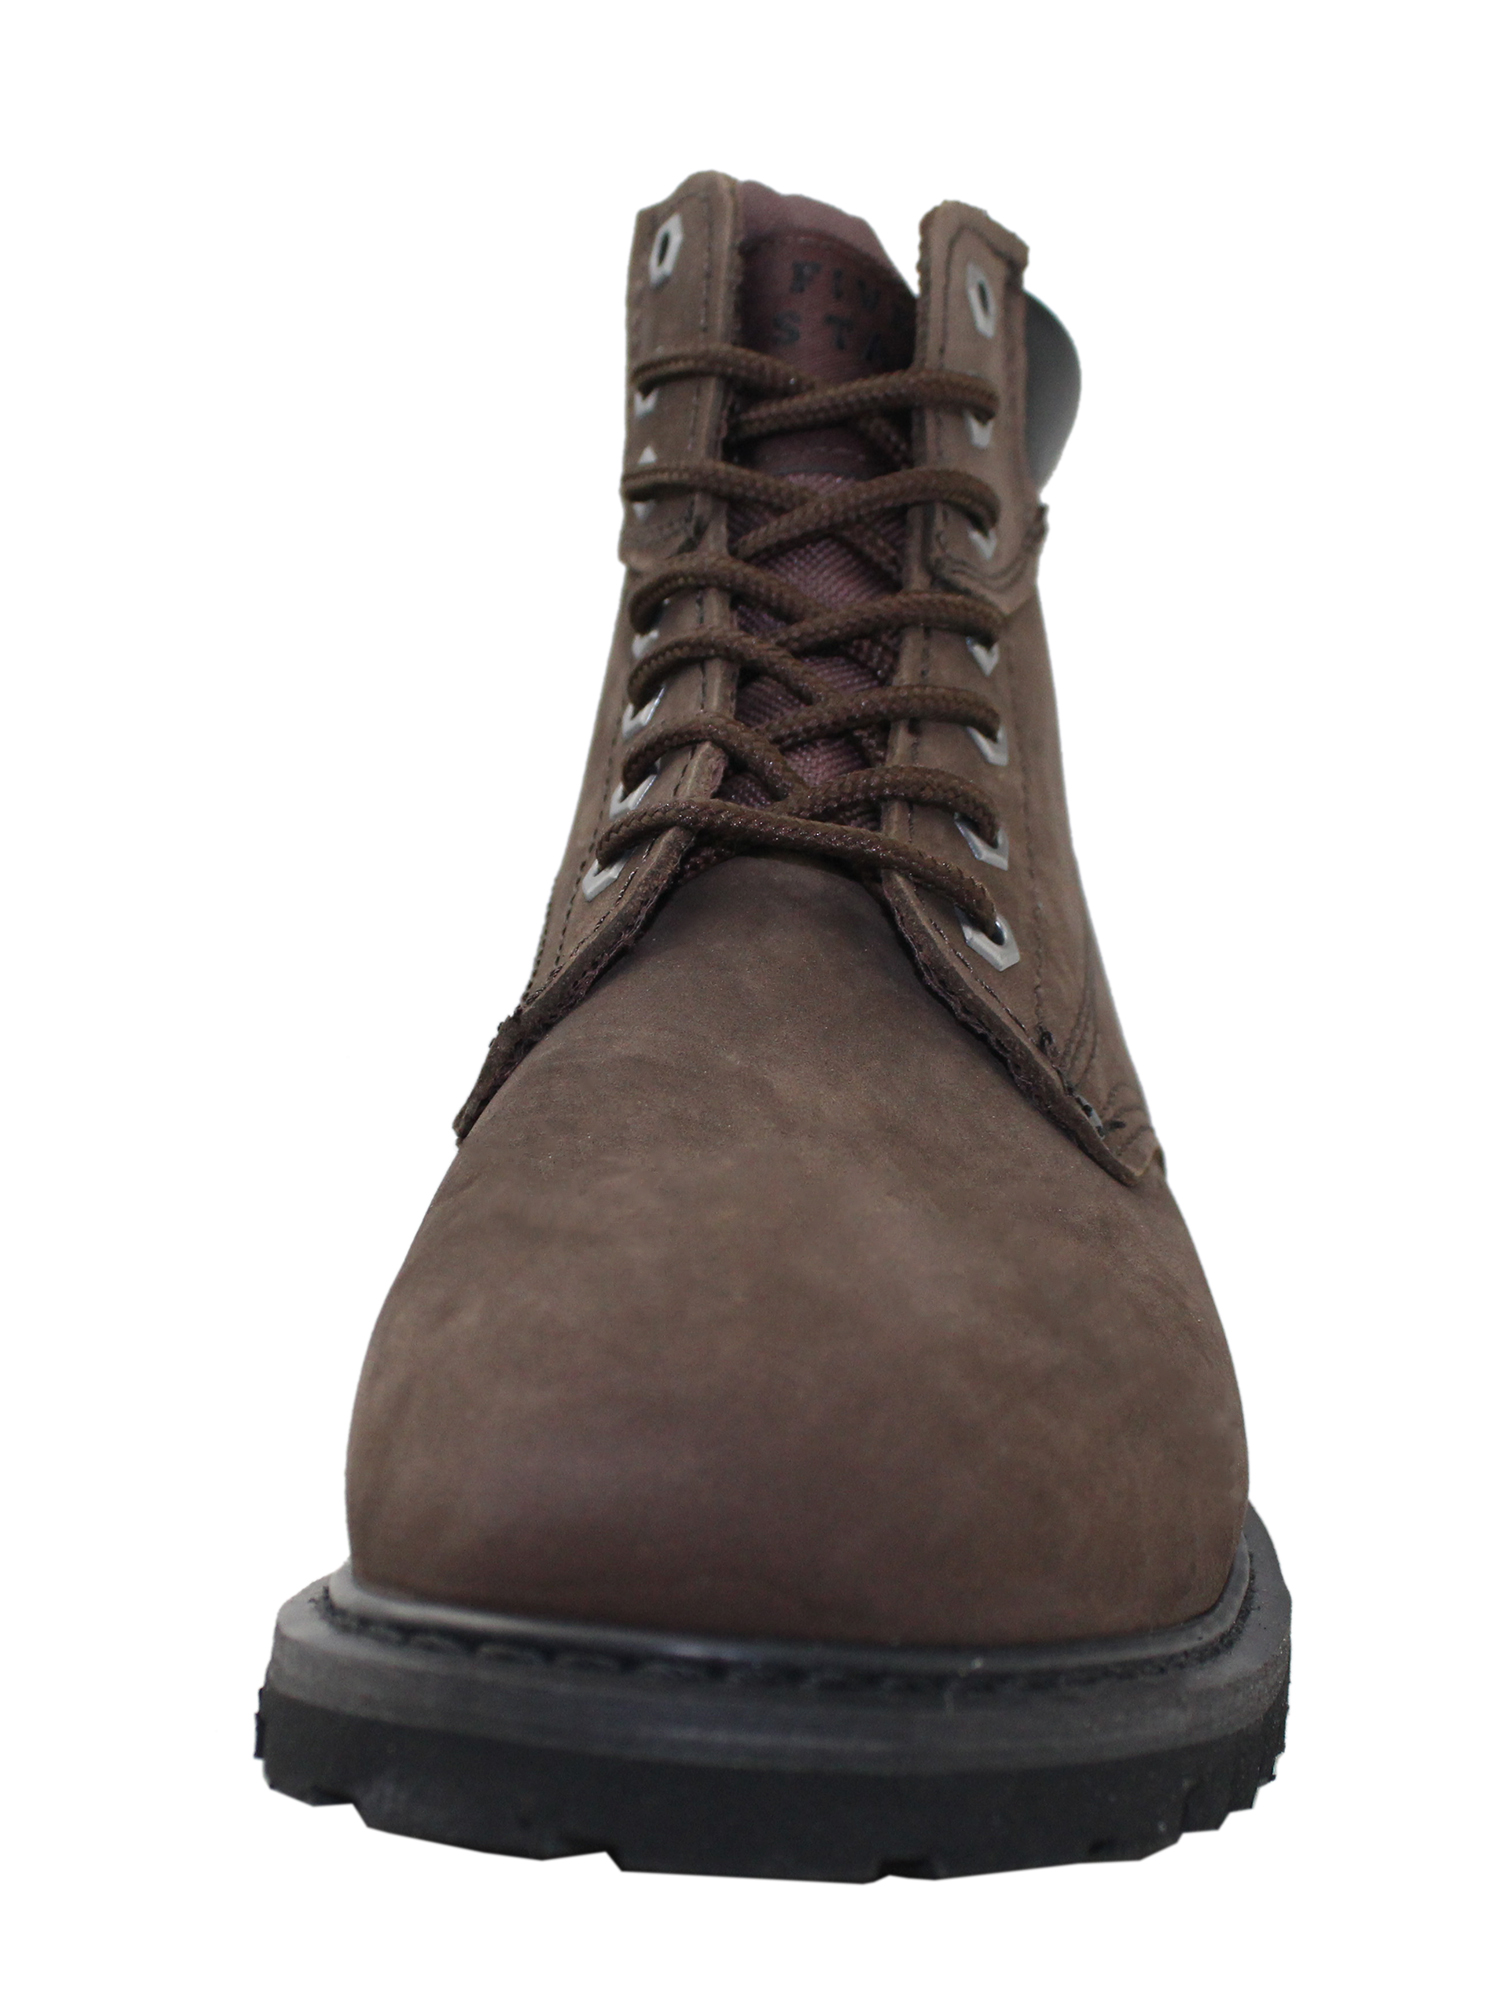 Mens Casual Work Shoes Fashion Nubuck Leather Lace-Up Ankle Work Boots - image 5 of 7